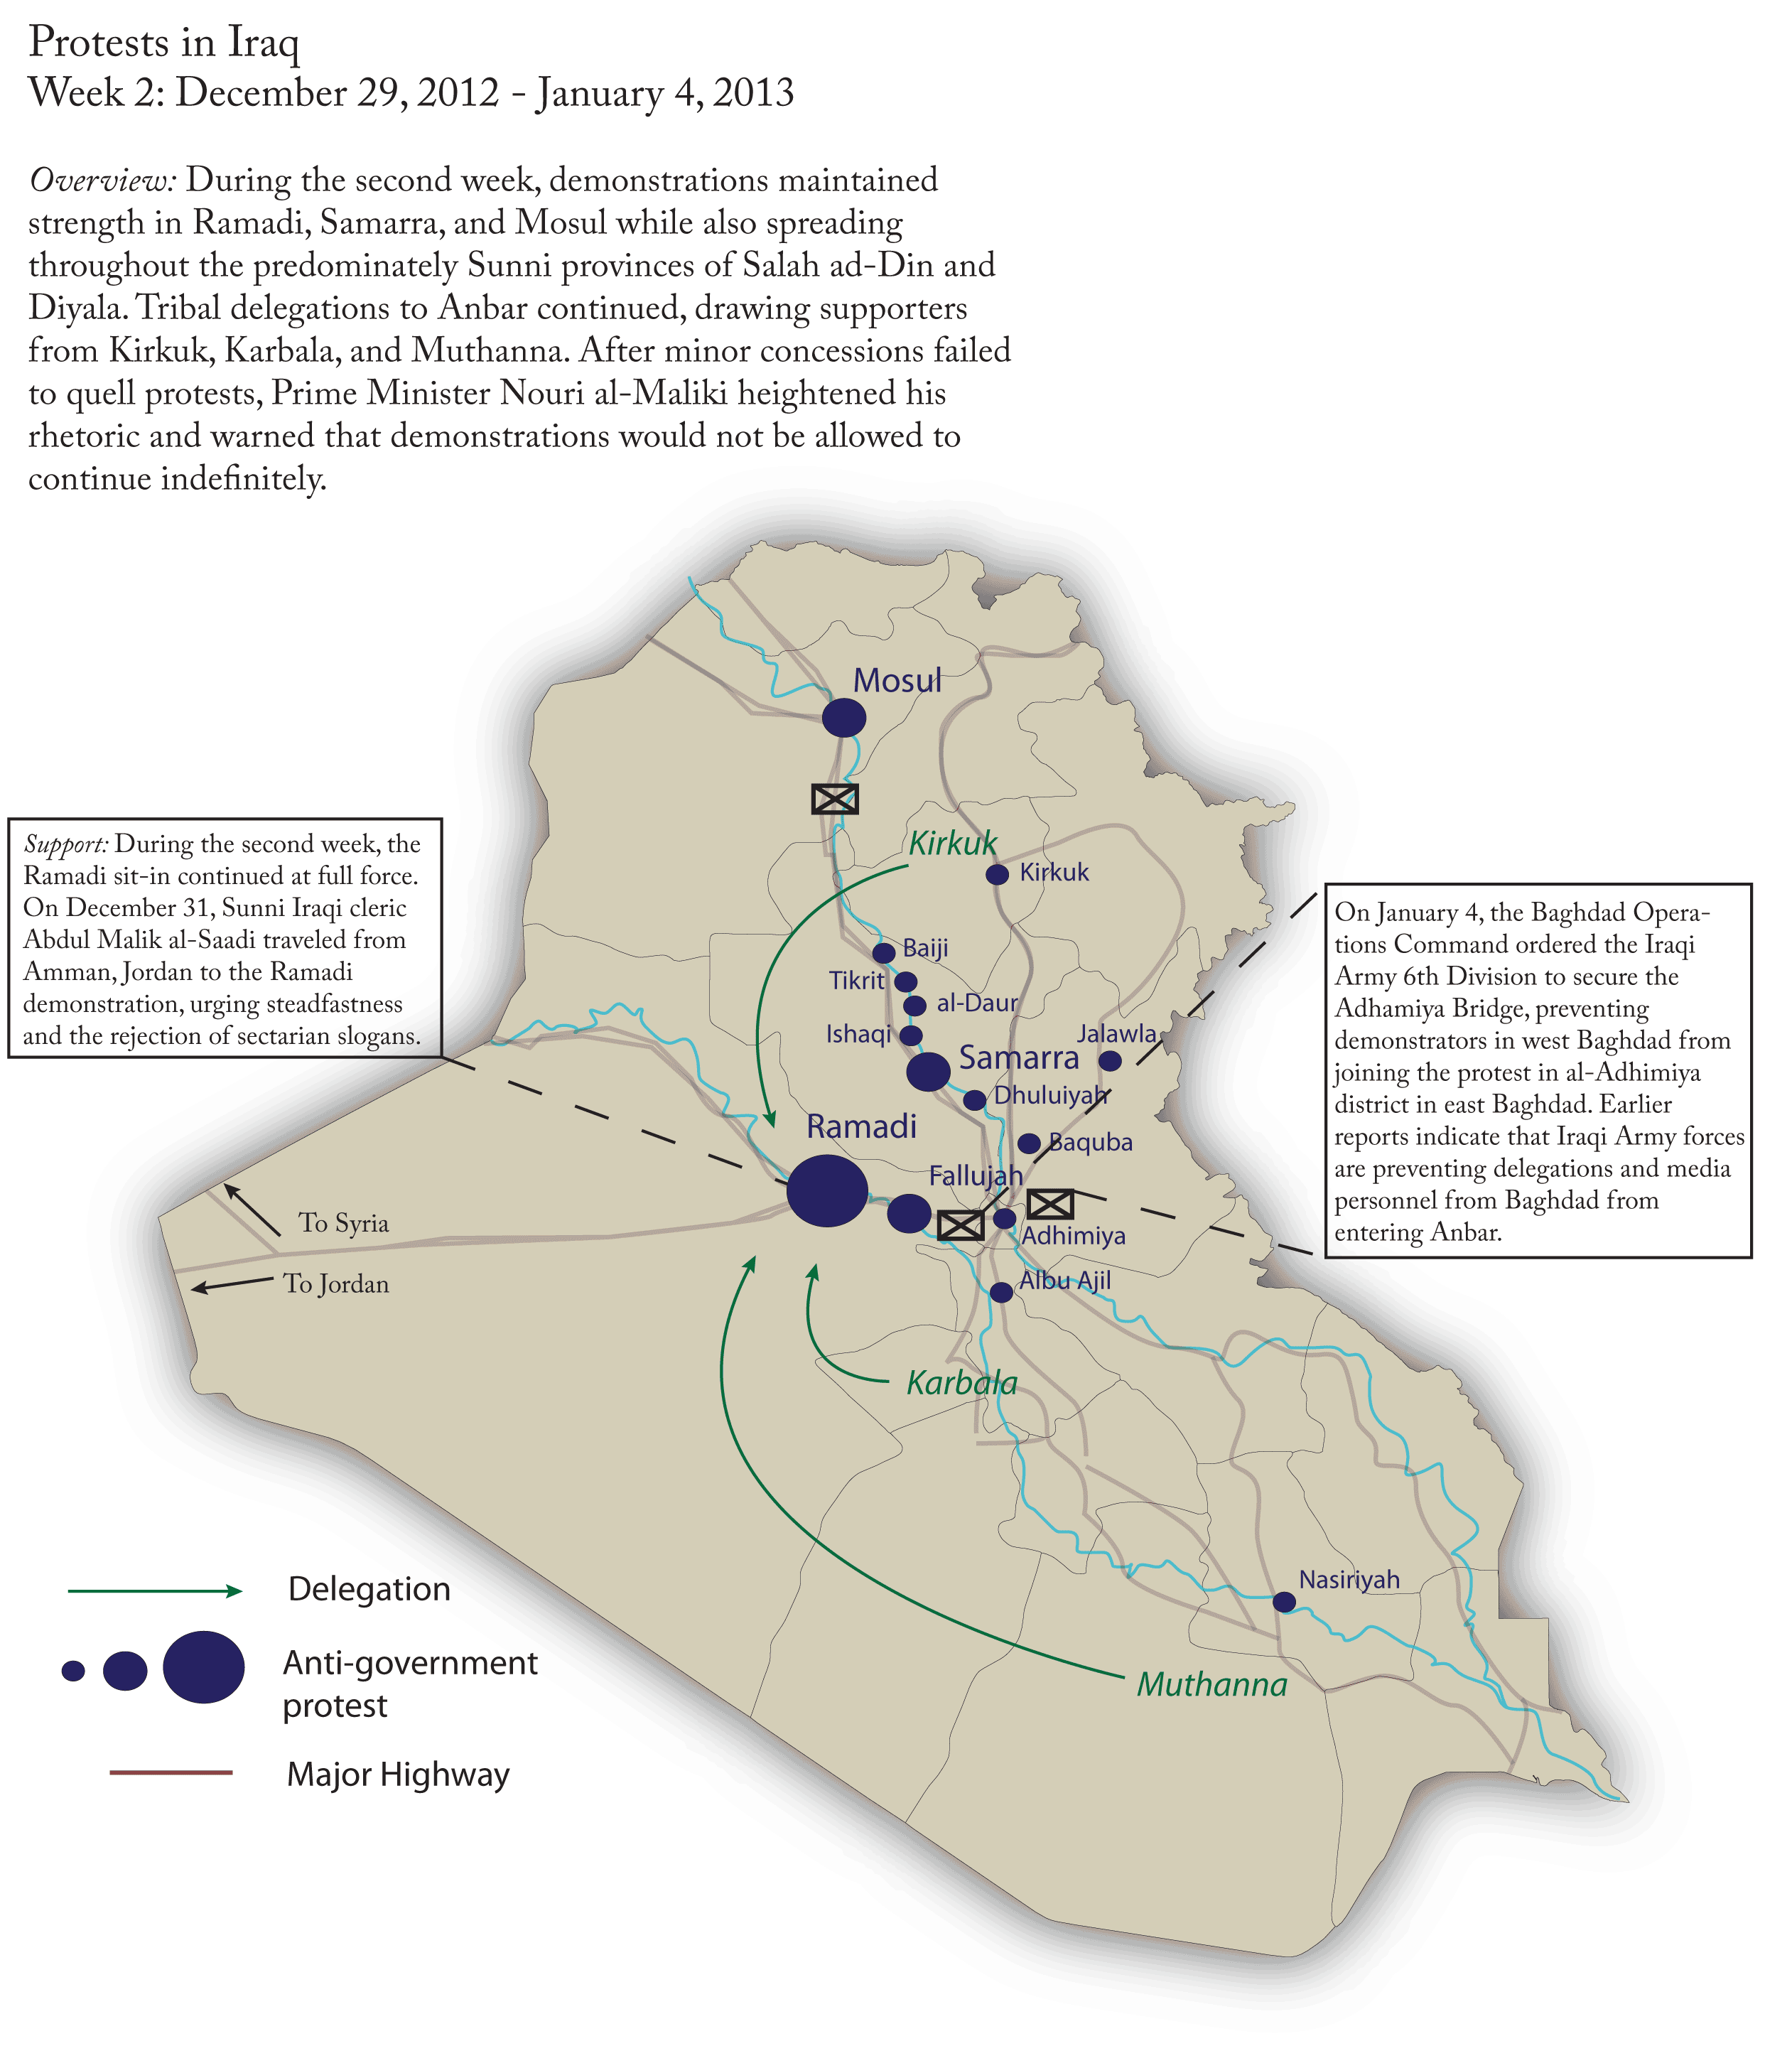 Protests in Iraq December 29, 2012-January 4, 2013